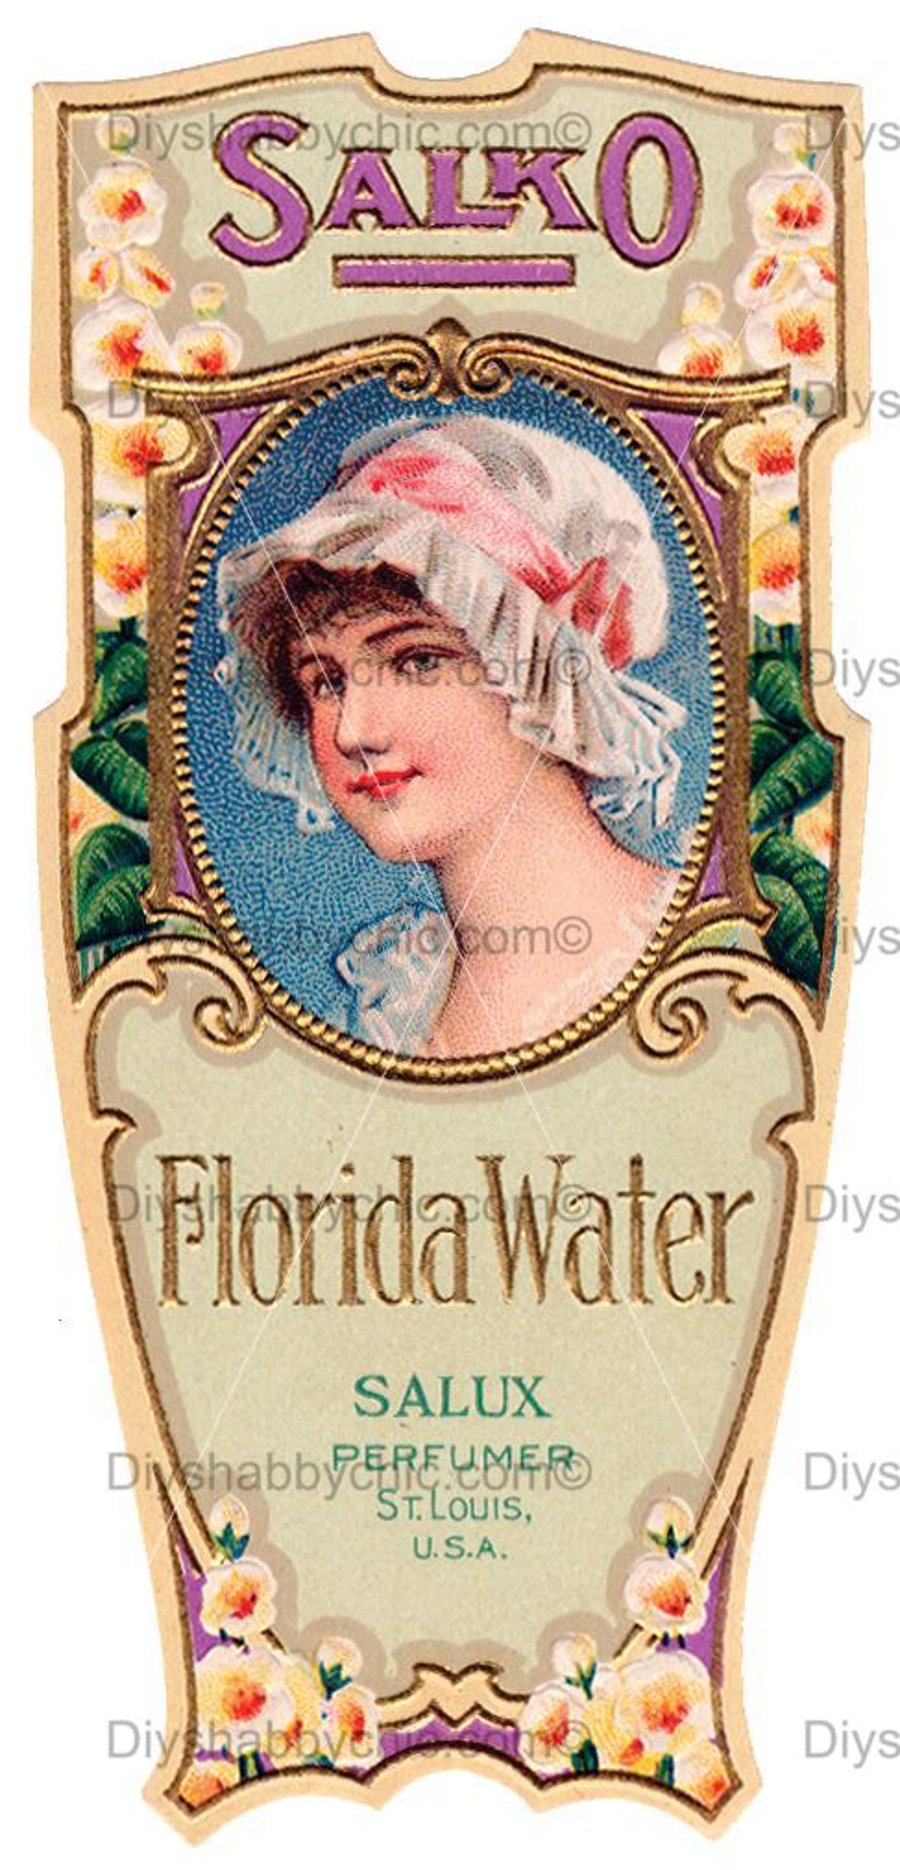 Waterslide Wood Furniture Decal Vintage Image Transfer Shabby Chic Florida Water